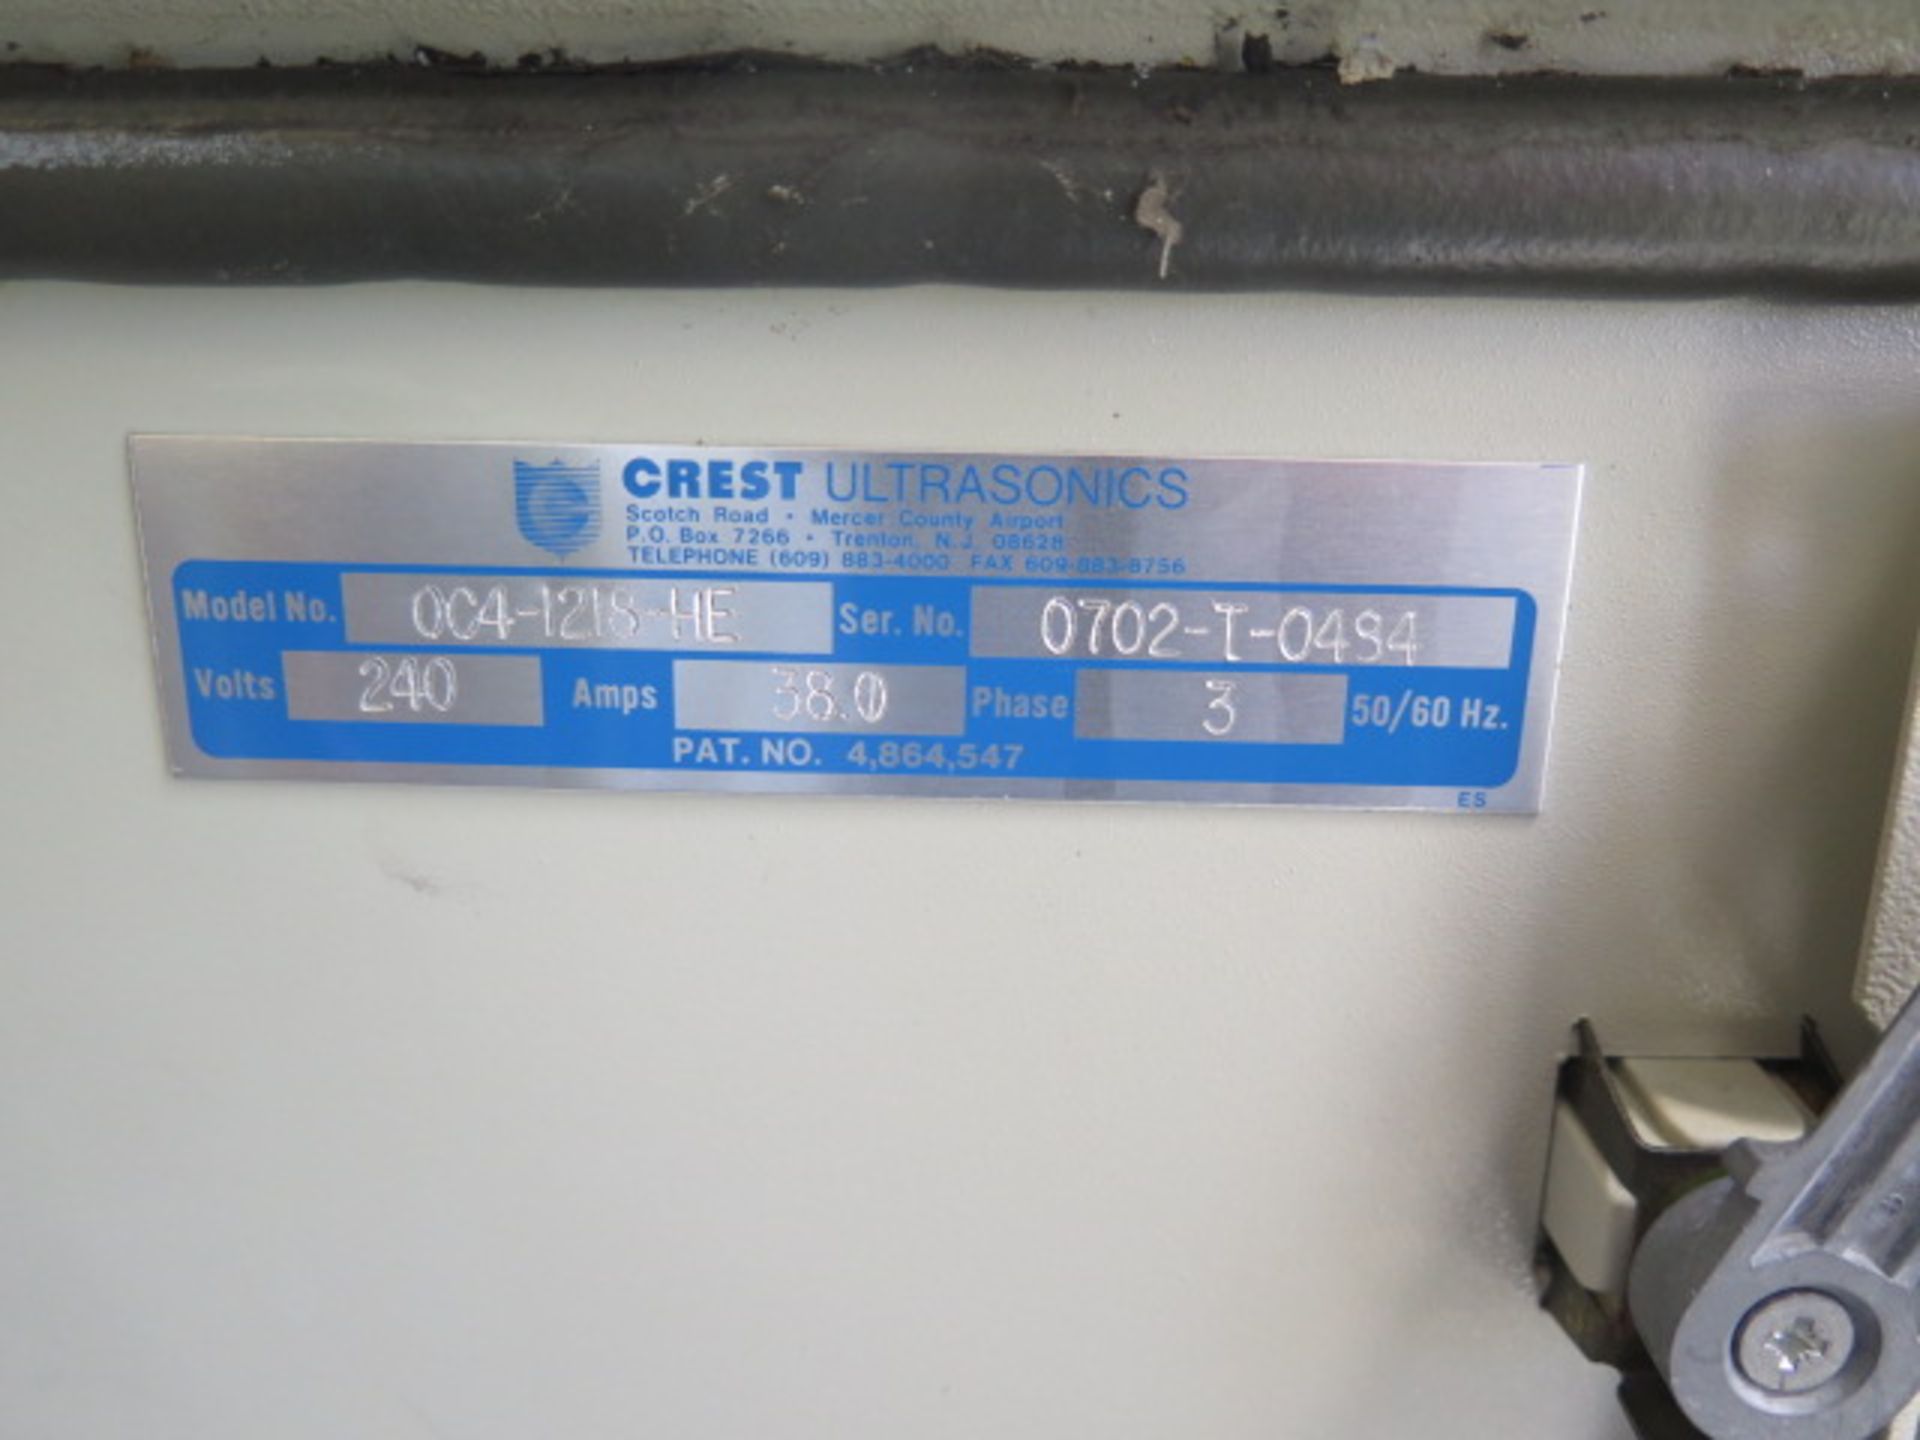 Crest Ultrasonic mdl. OC4-1218-HE 4-Station Ultrasonic Cleaning System s/n 0702-T-0484, SOLD AS IS - Image 10 of 10